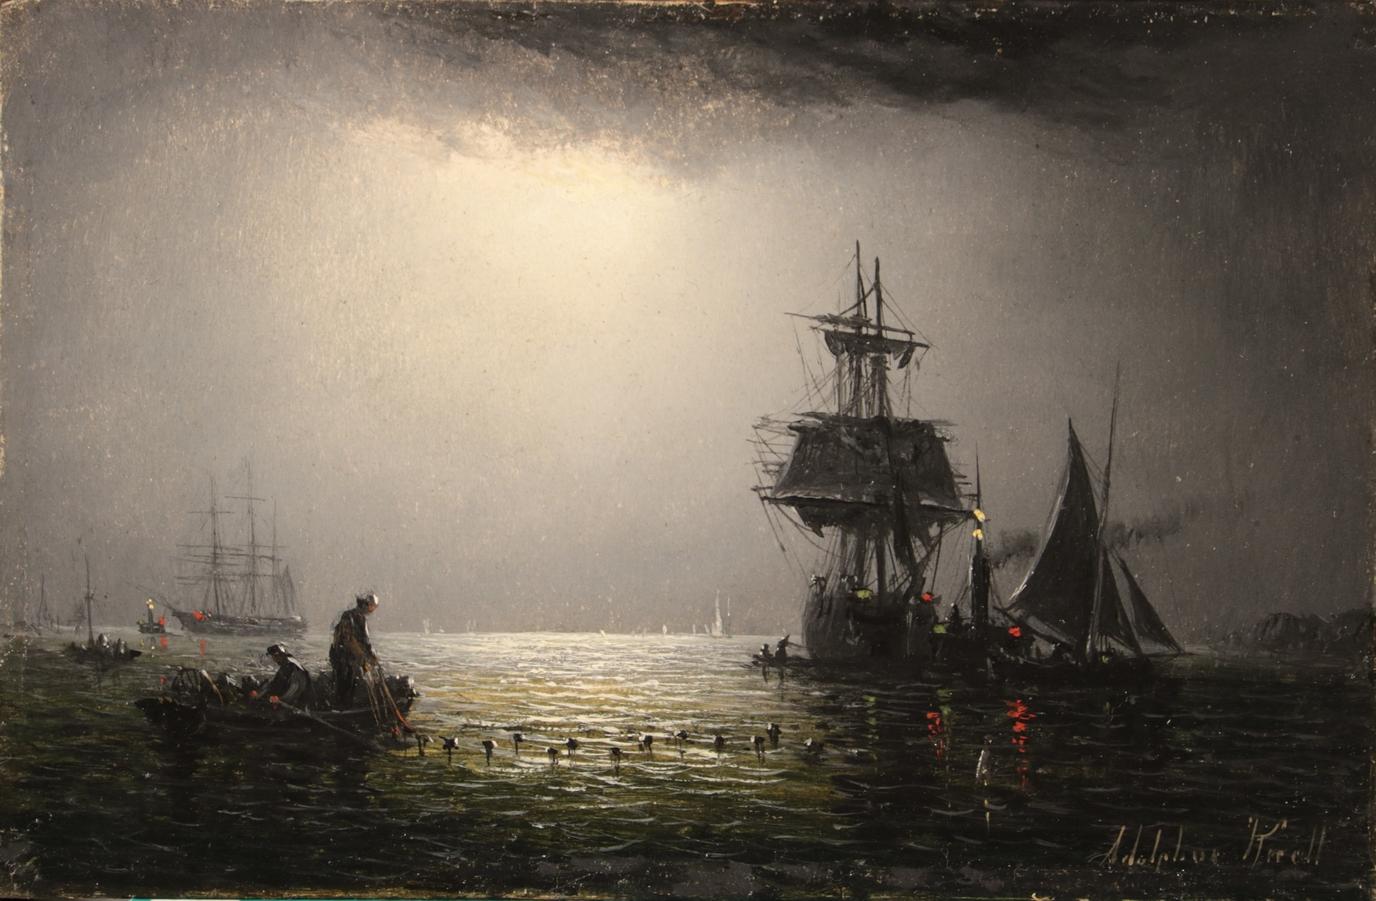 Adolphus Knell Landscape Painting - "Shipping by Moonlight"